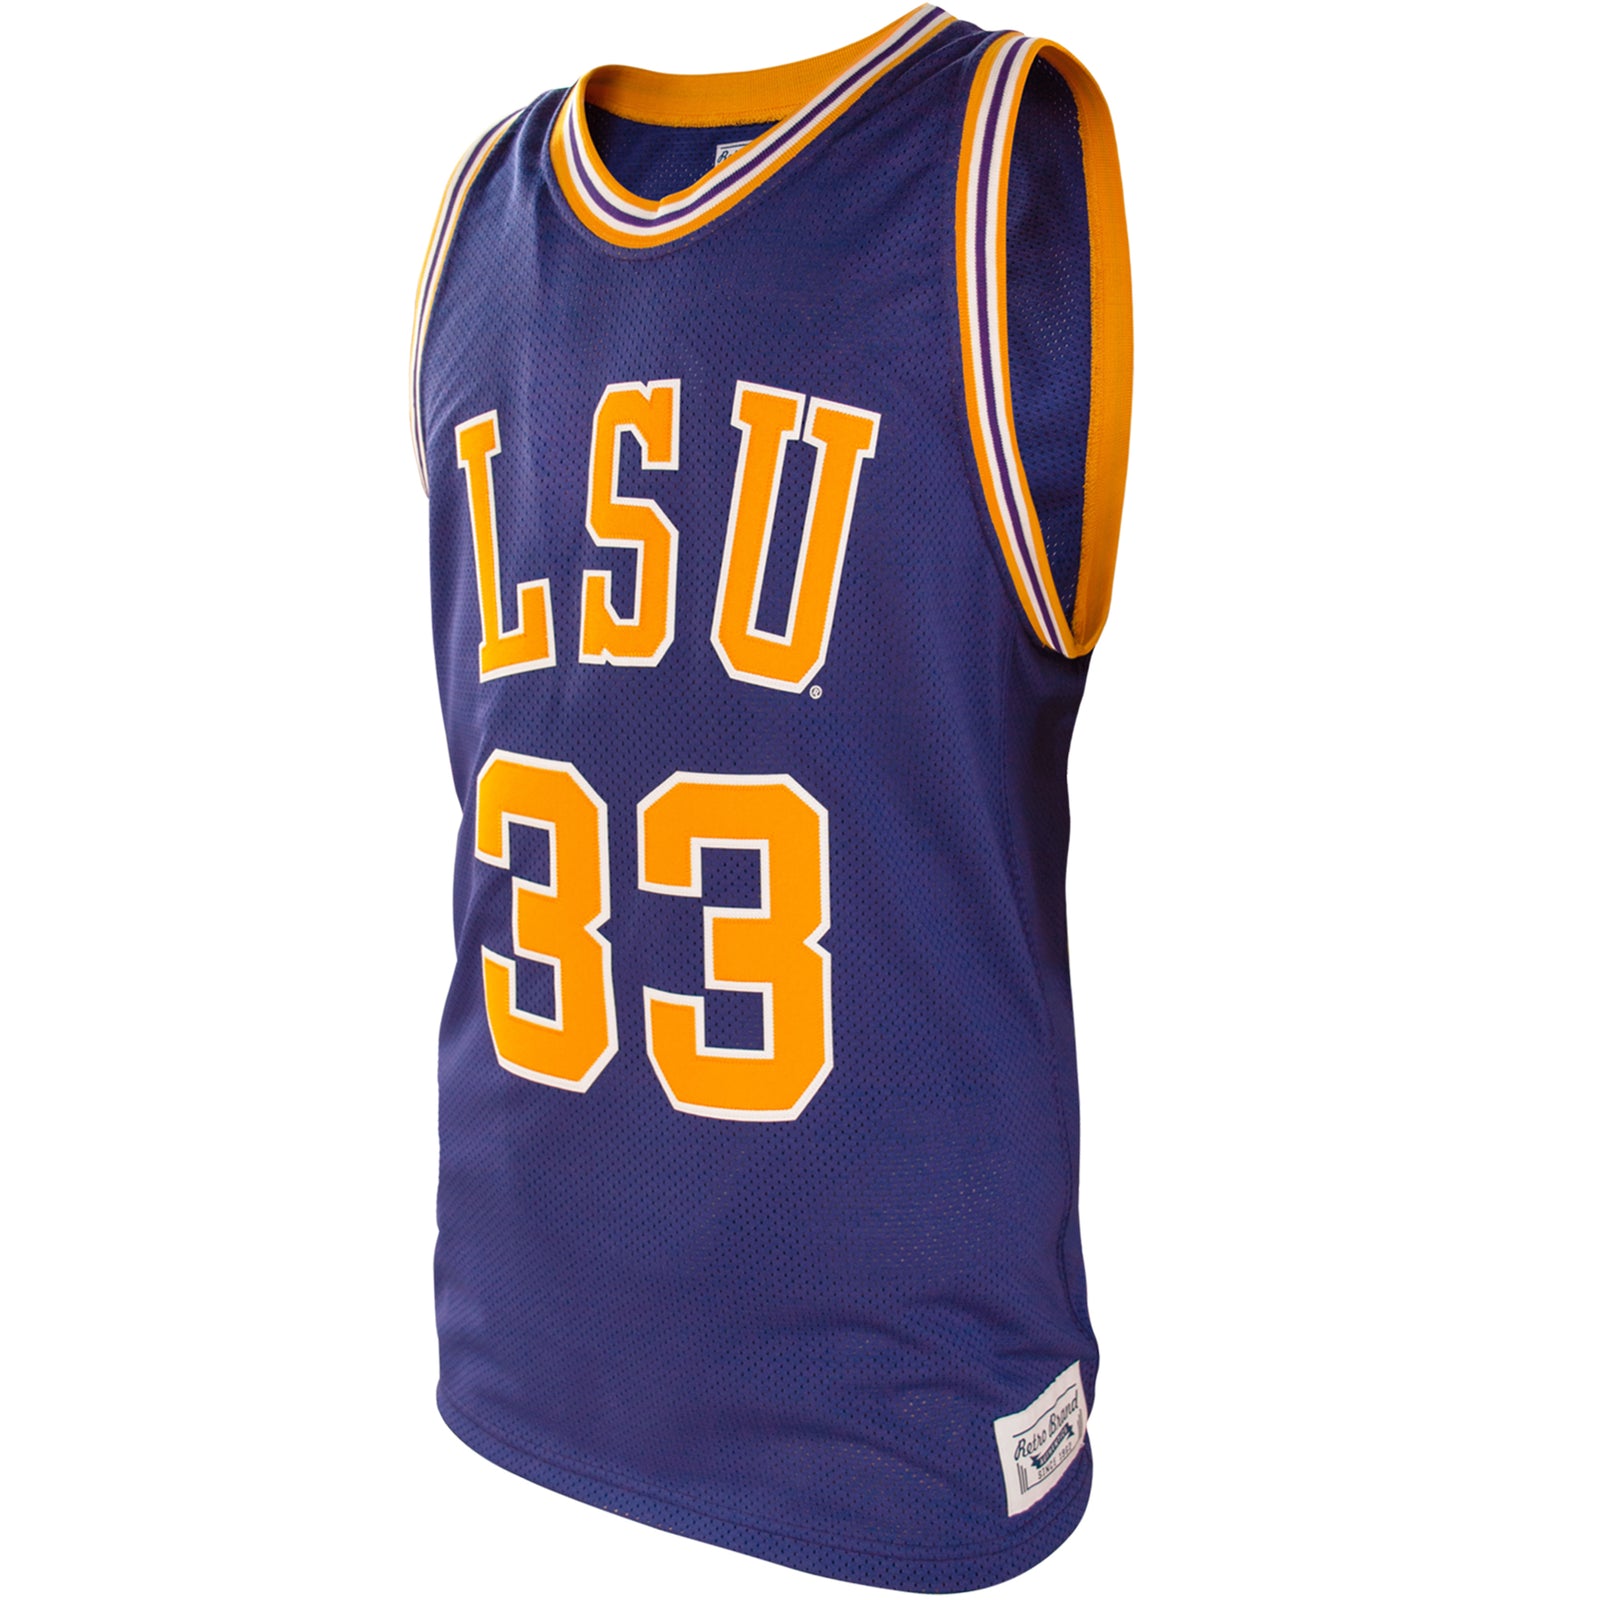 LSU Tigers Shaquille O'Neal Throwback Jersey